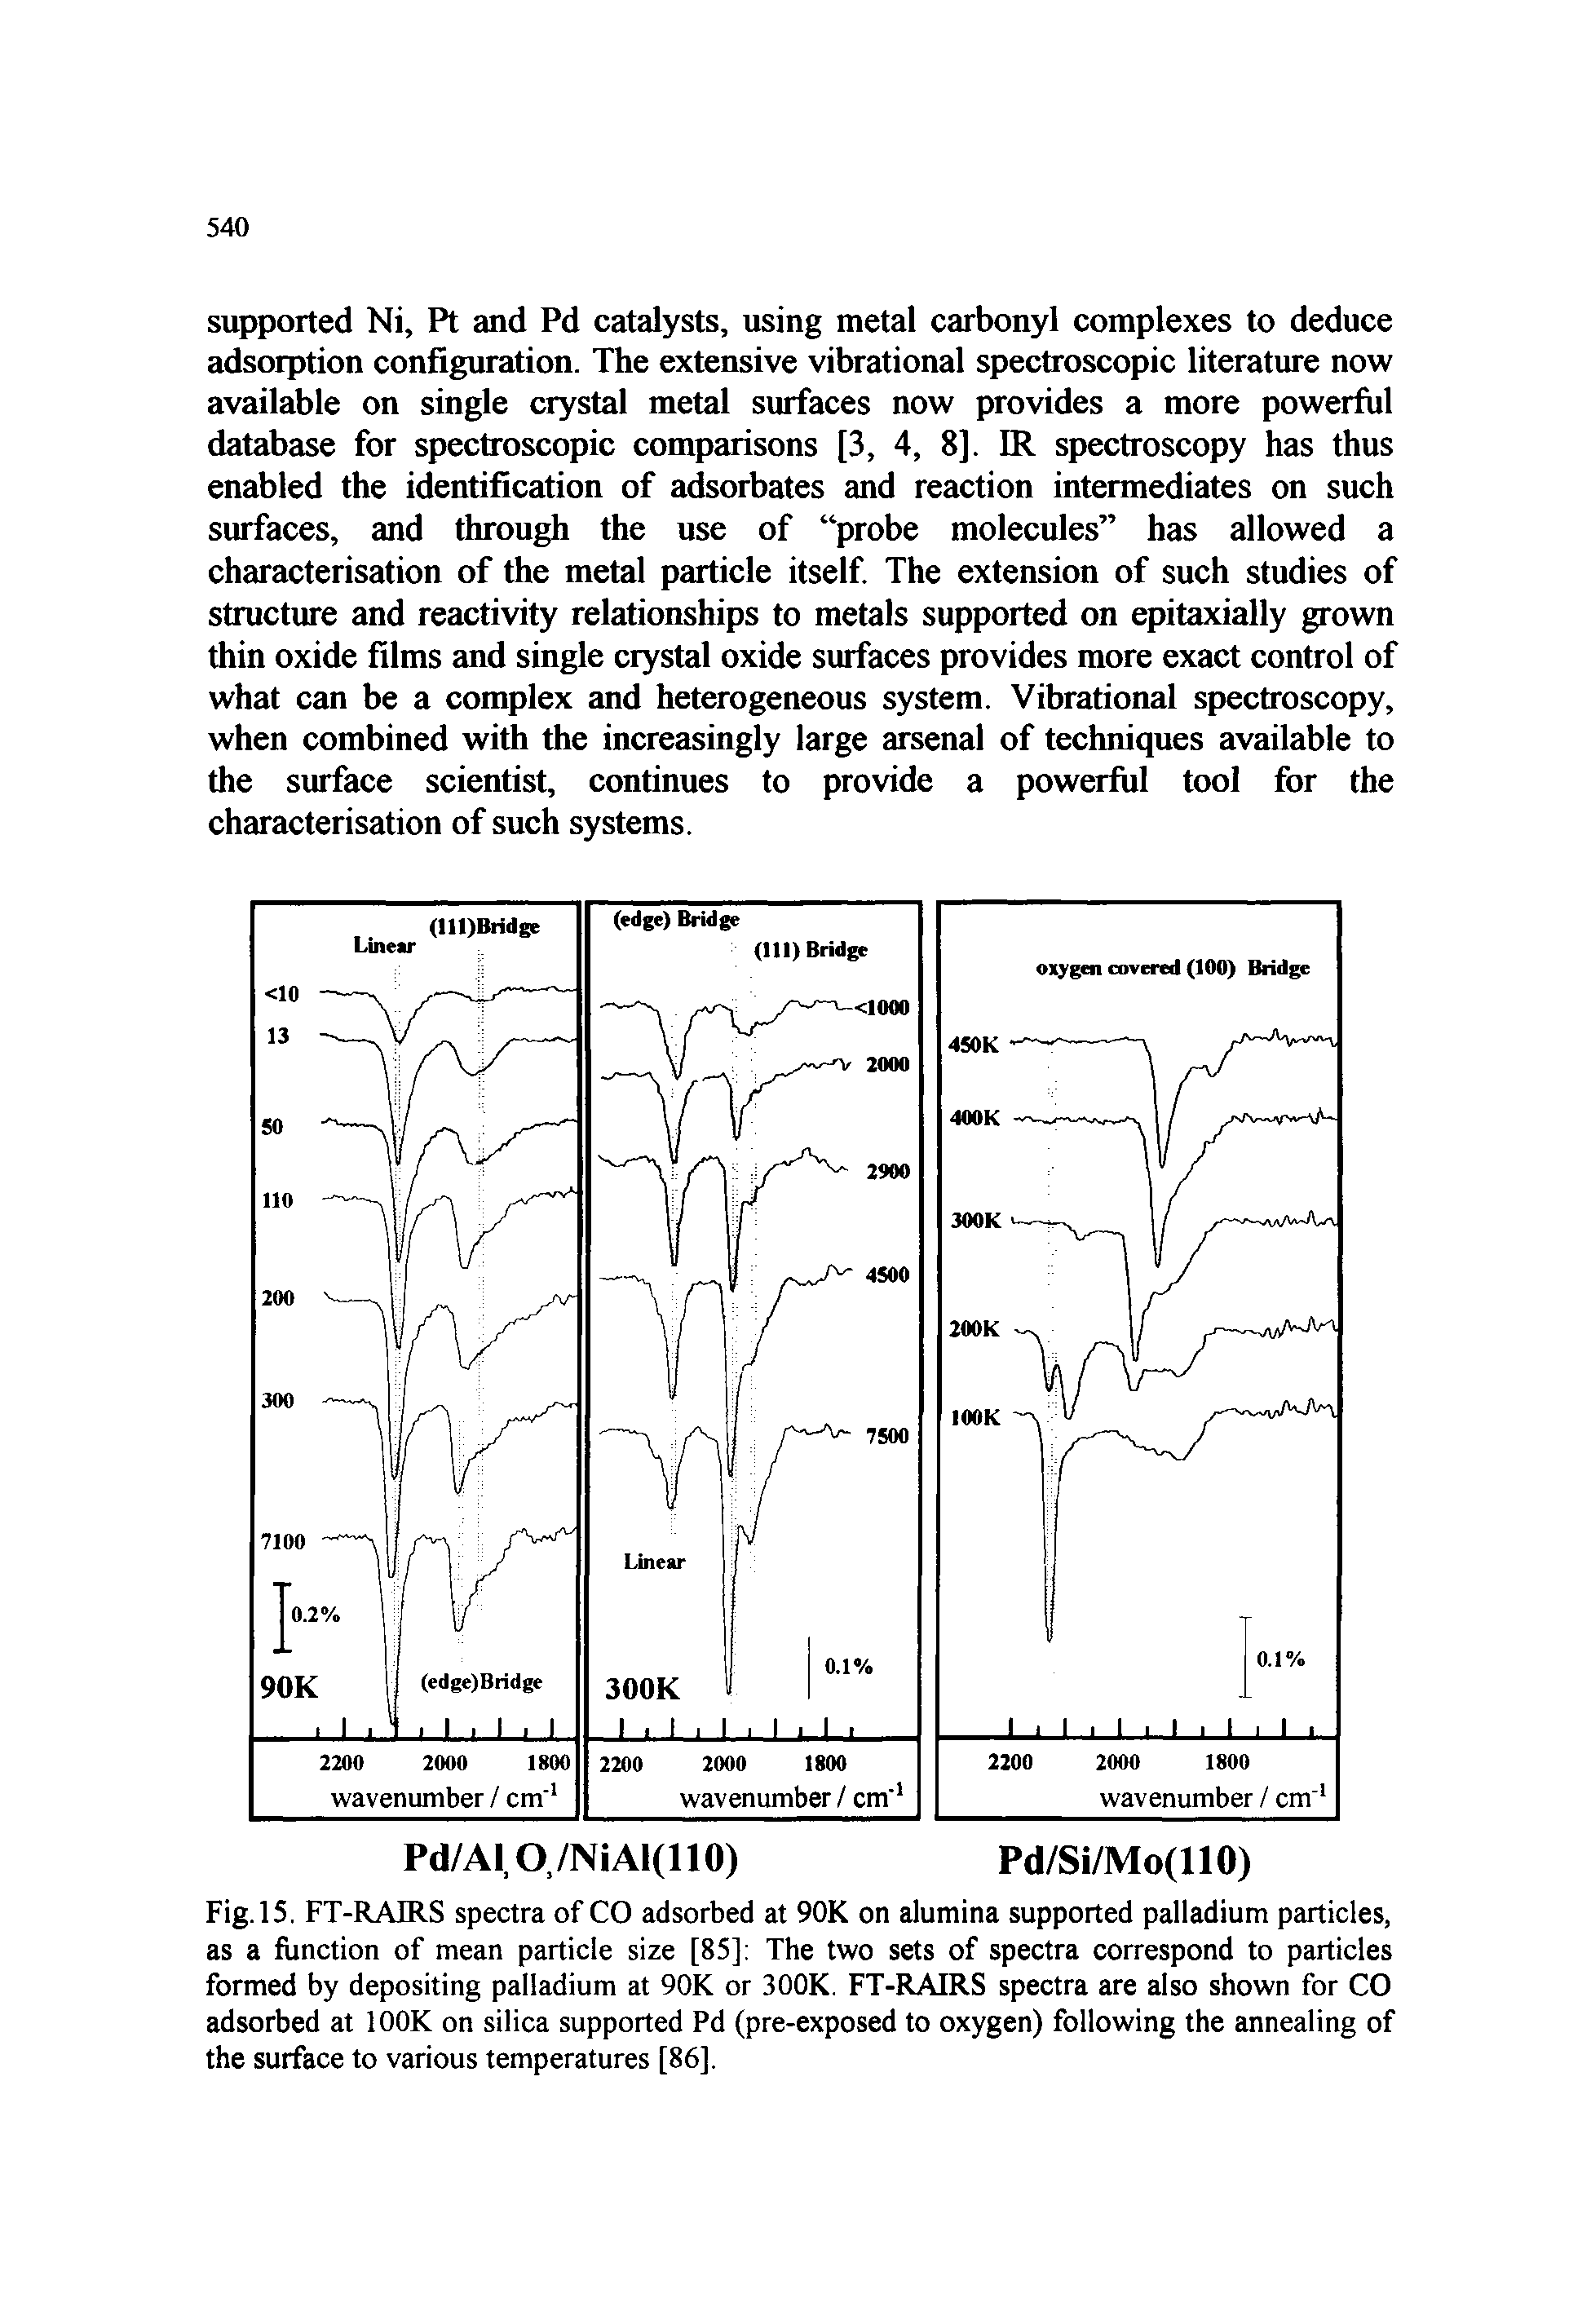 Fig.15. FT-RAIRS spectra of CO adsorbed at 90K on alumina supported palladium particles, as a function of mean particle size [85] The two sets of spectra correspond to particles formed by depositing palladium at 90K or 300K. FT-RAIRS spectra are also shown for CO adsorbed at lOOK on silica supported Pd (pre-exposed to oxygen) following the annealing of the surface to various temperatures [86].